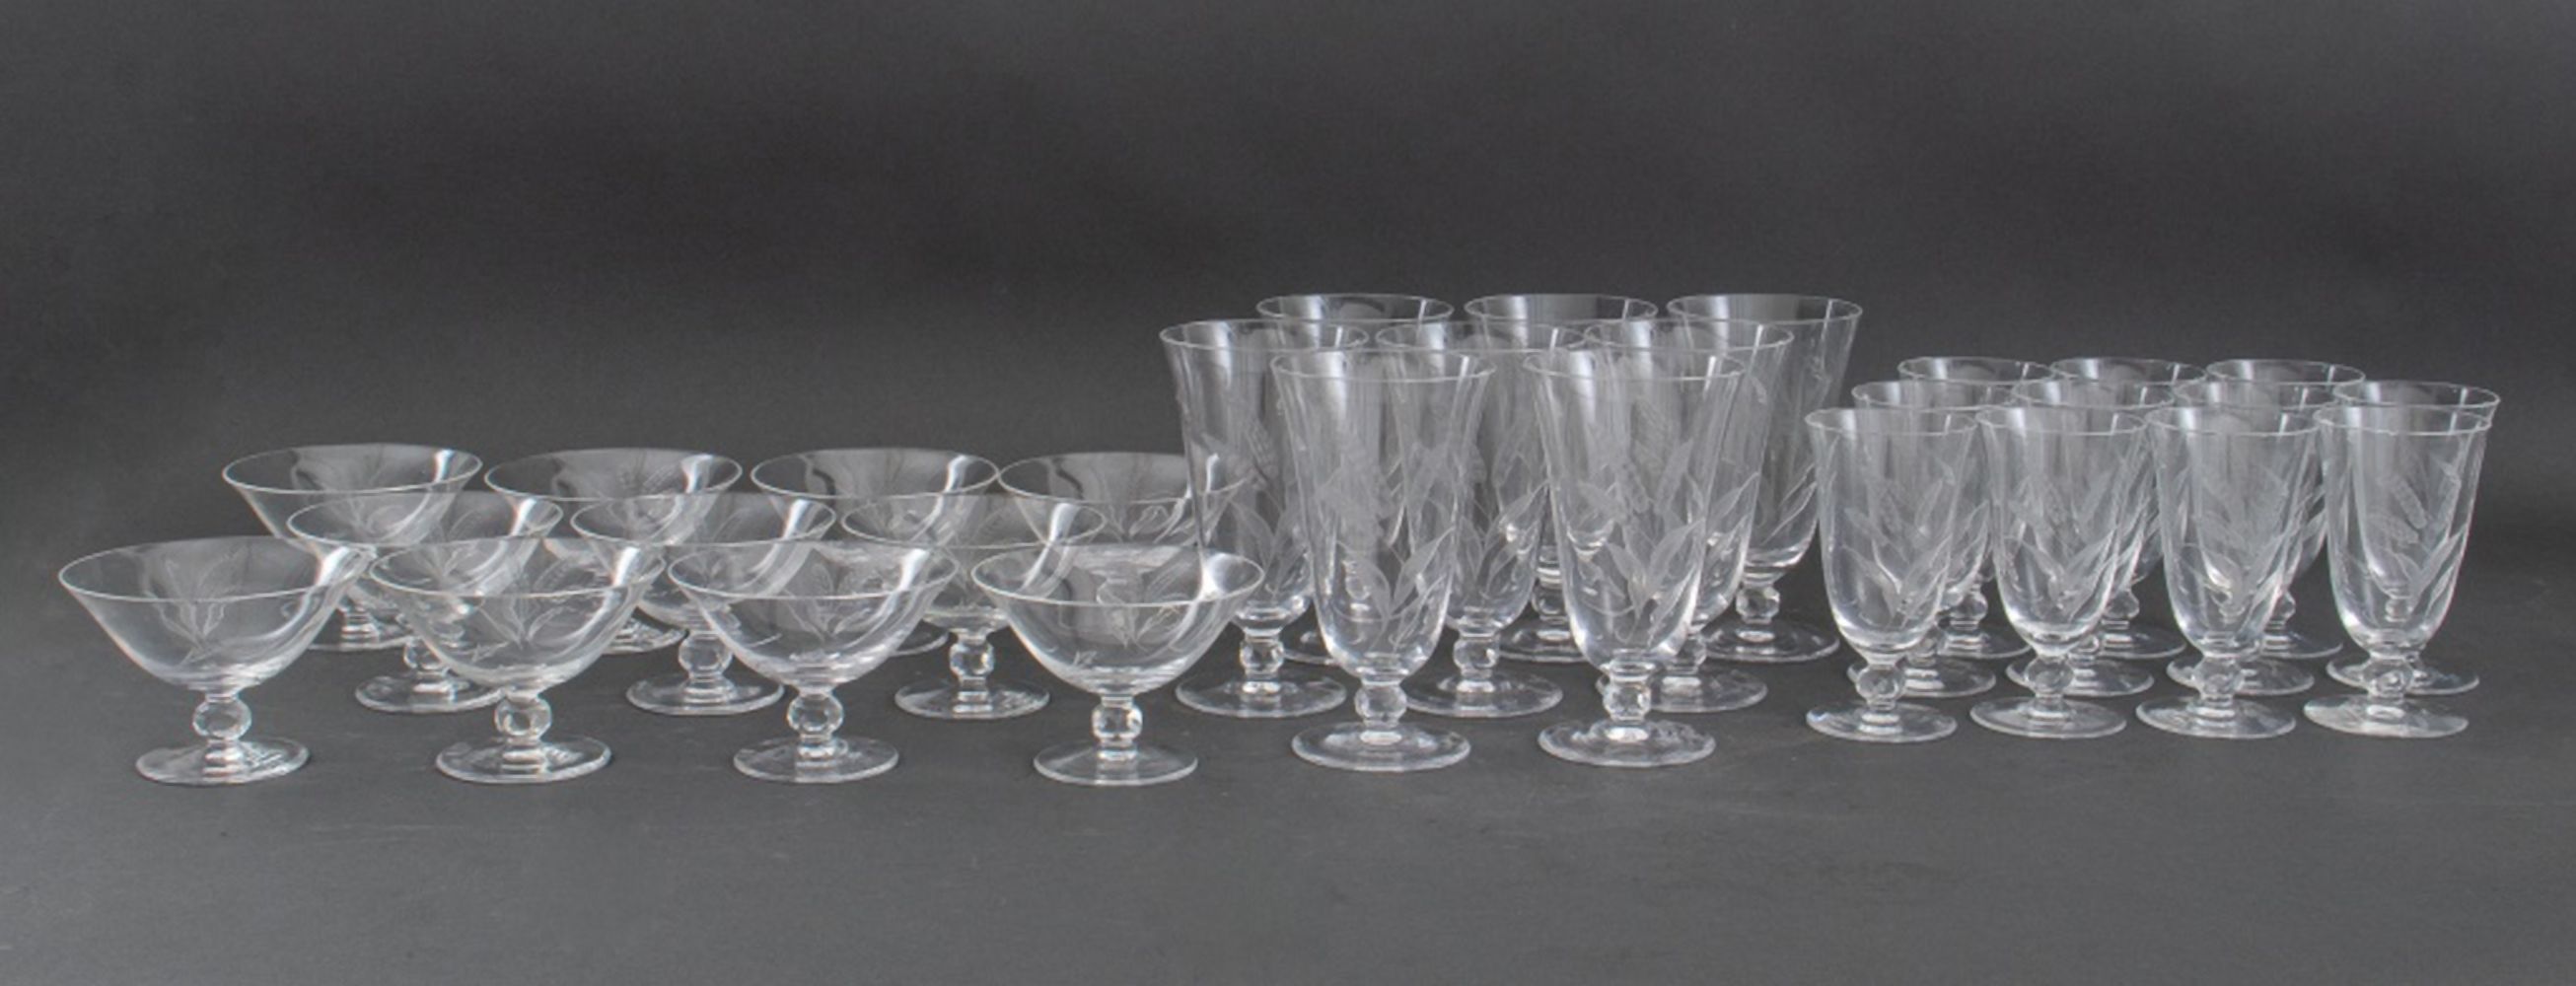 ROSENTHAL DIGNITY PARTIAL GLASSWARE 2fb055